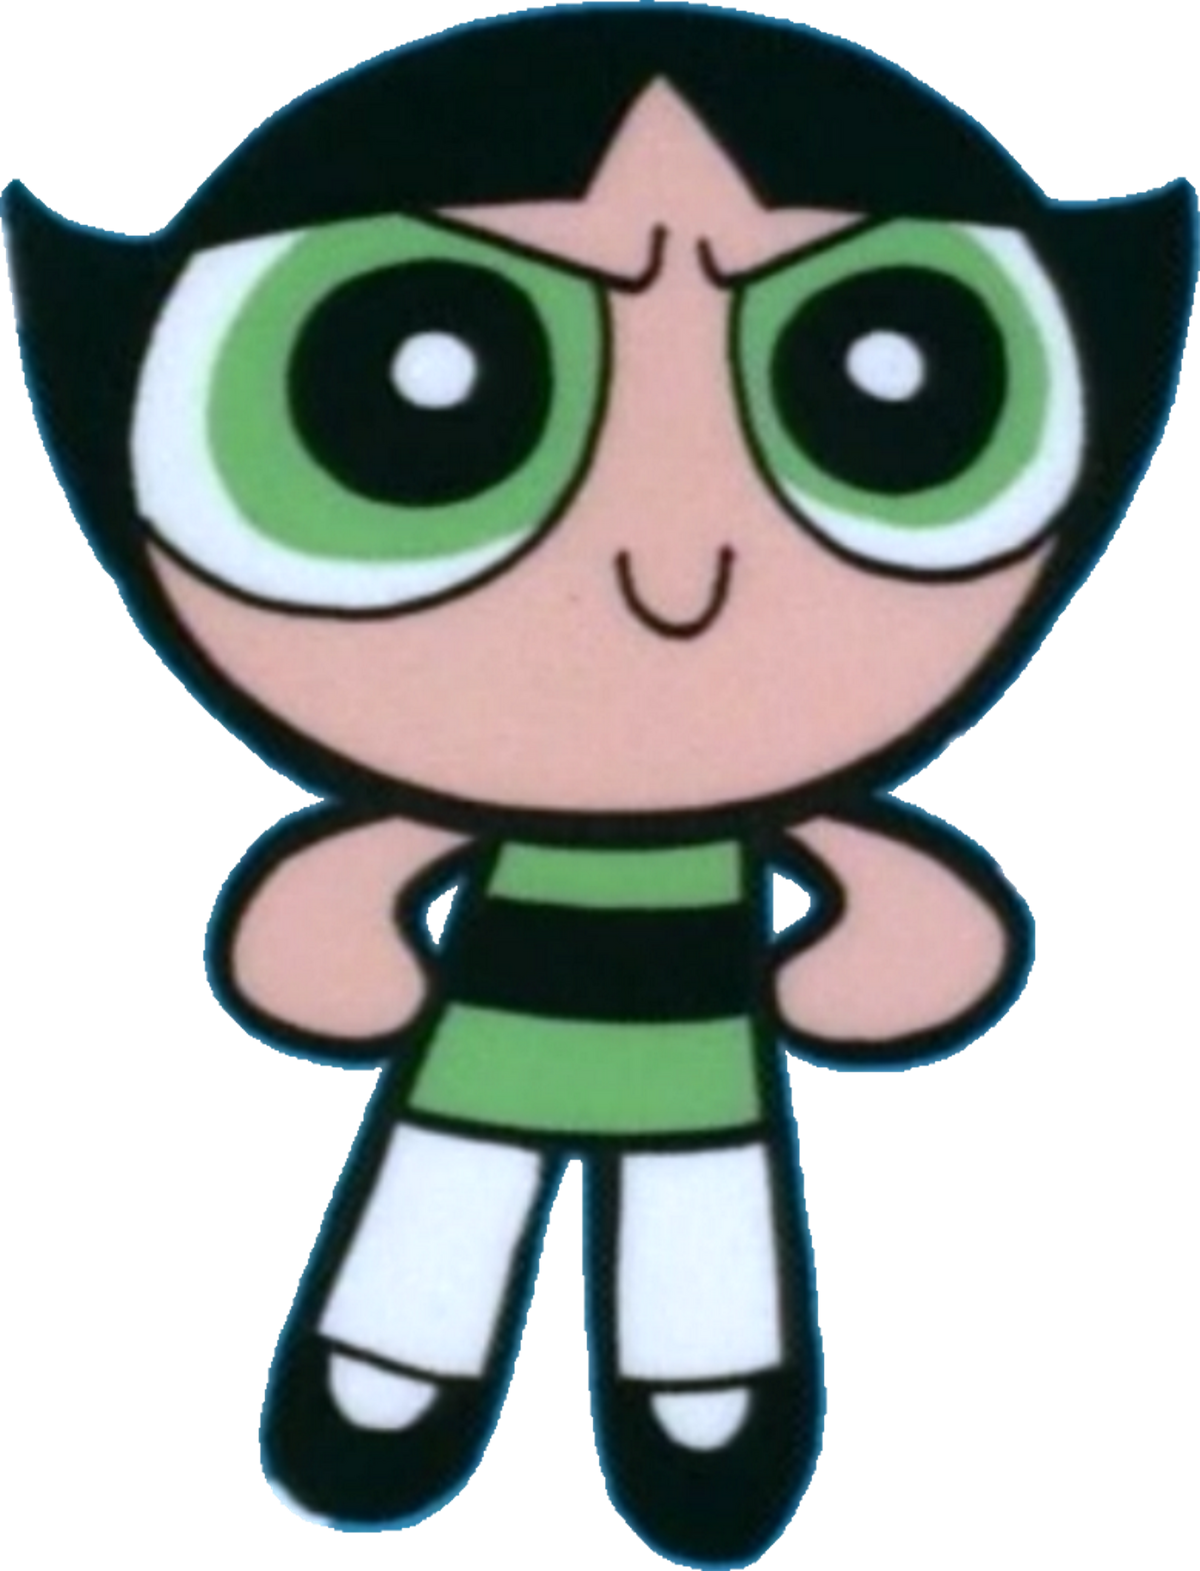 Buttercup (character) Scratchpad Fandom image